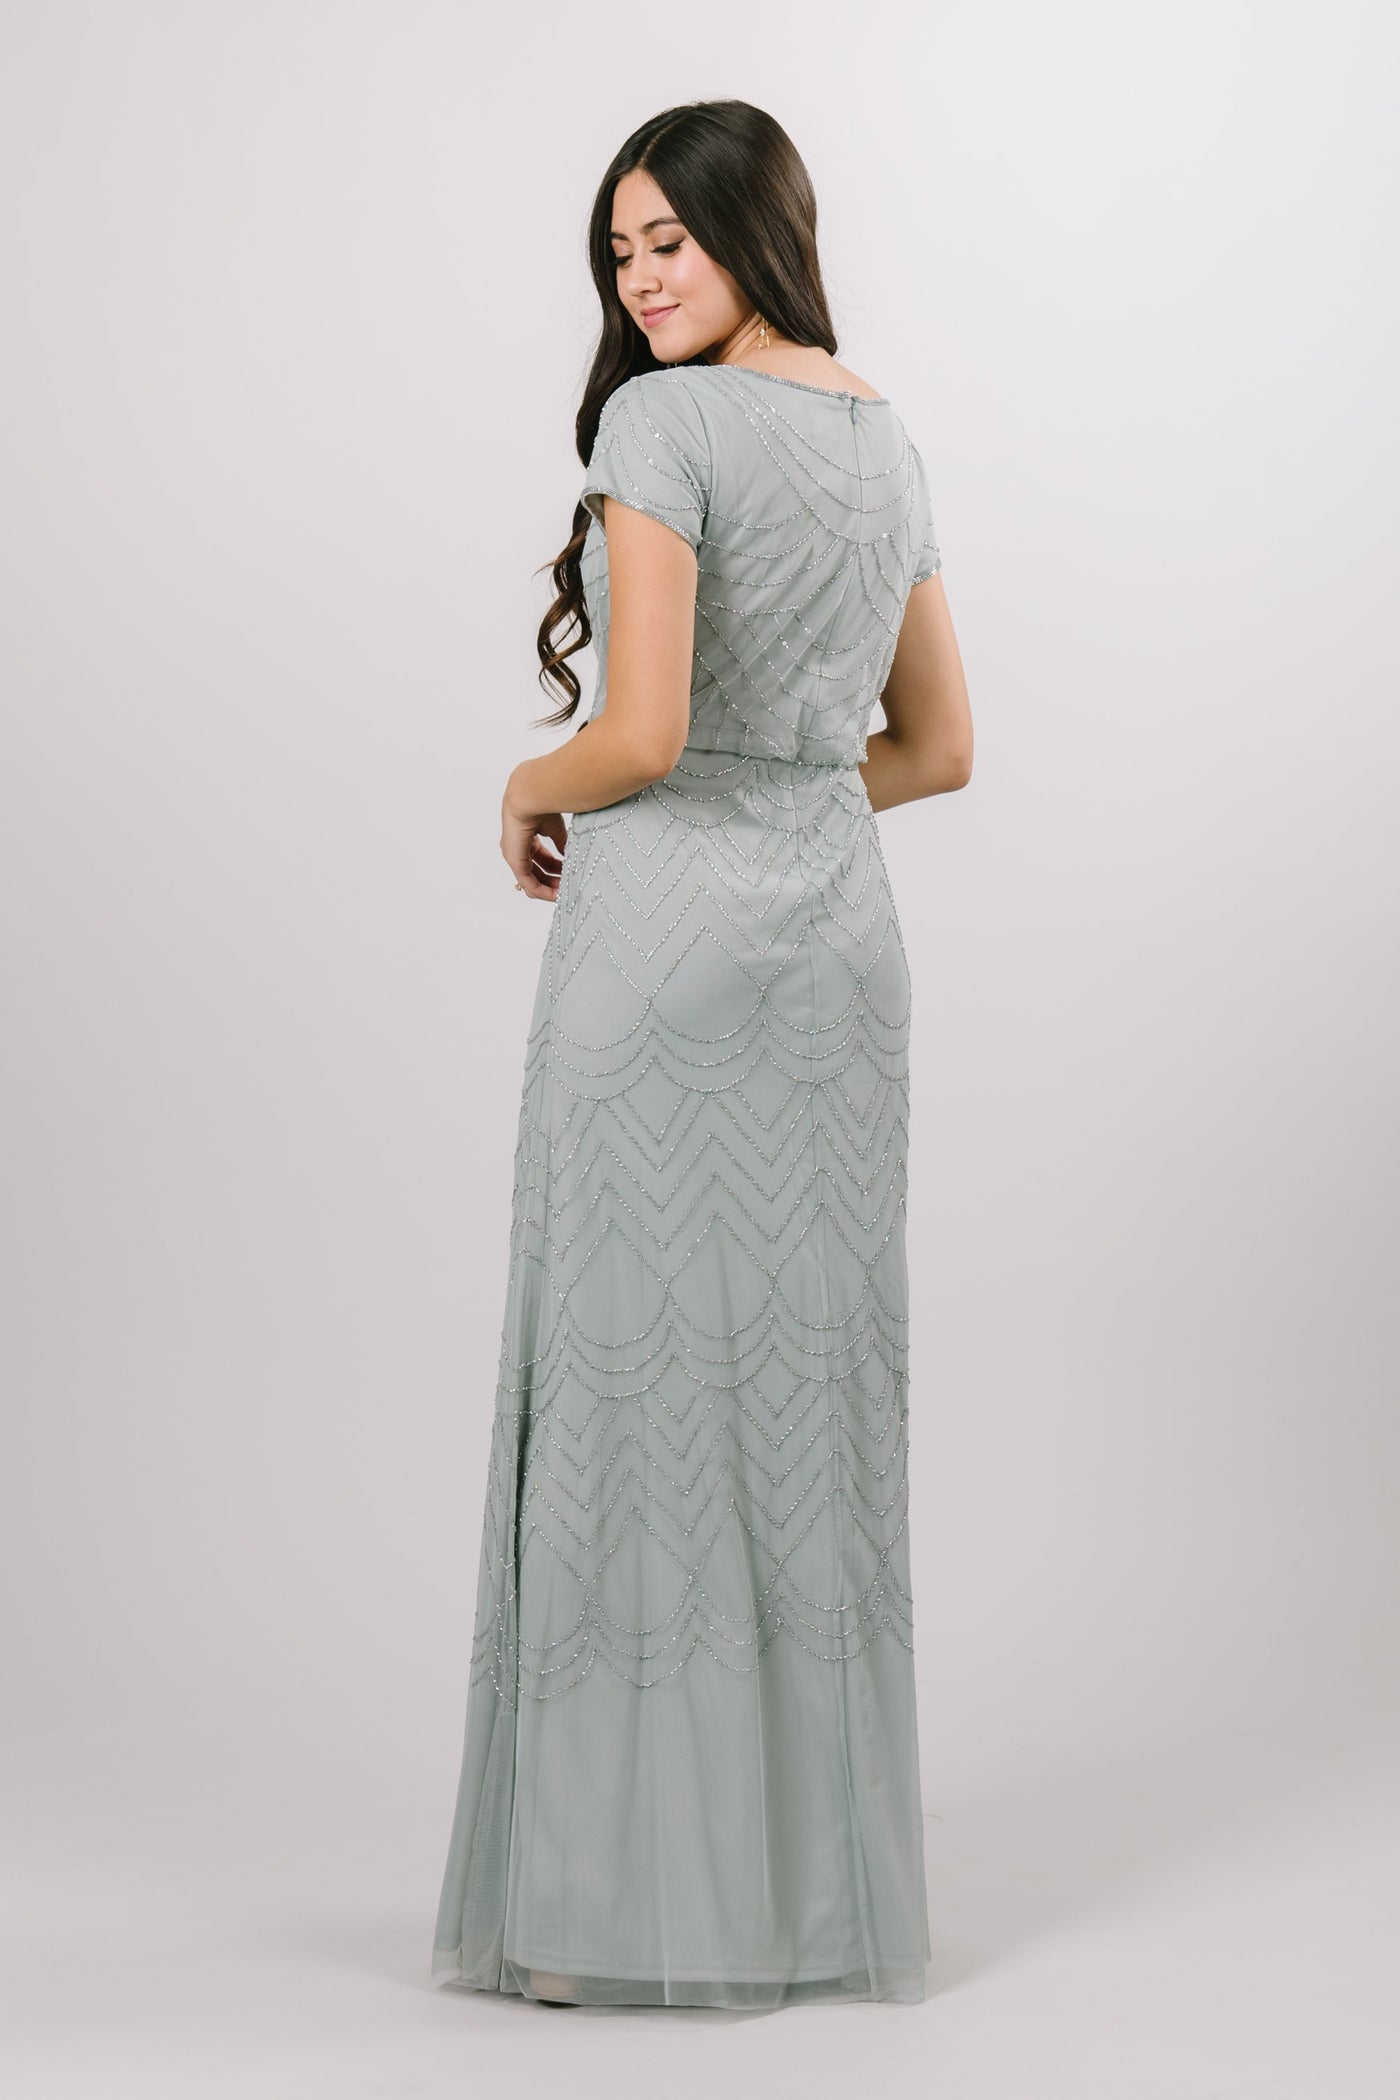 The modest bridesmaid or prom dress creates a pop over bodice and a delicate fitted skirt, not to mention the draped beaded pattern. In the color Sage.Modest Dresses - Modest Clothing - Modest Formalwear Dresses - Bridesmaid Modest Dresses. 